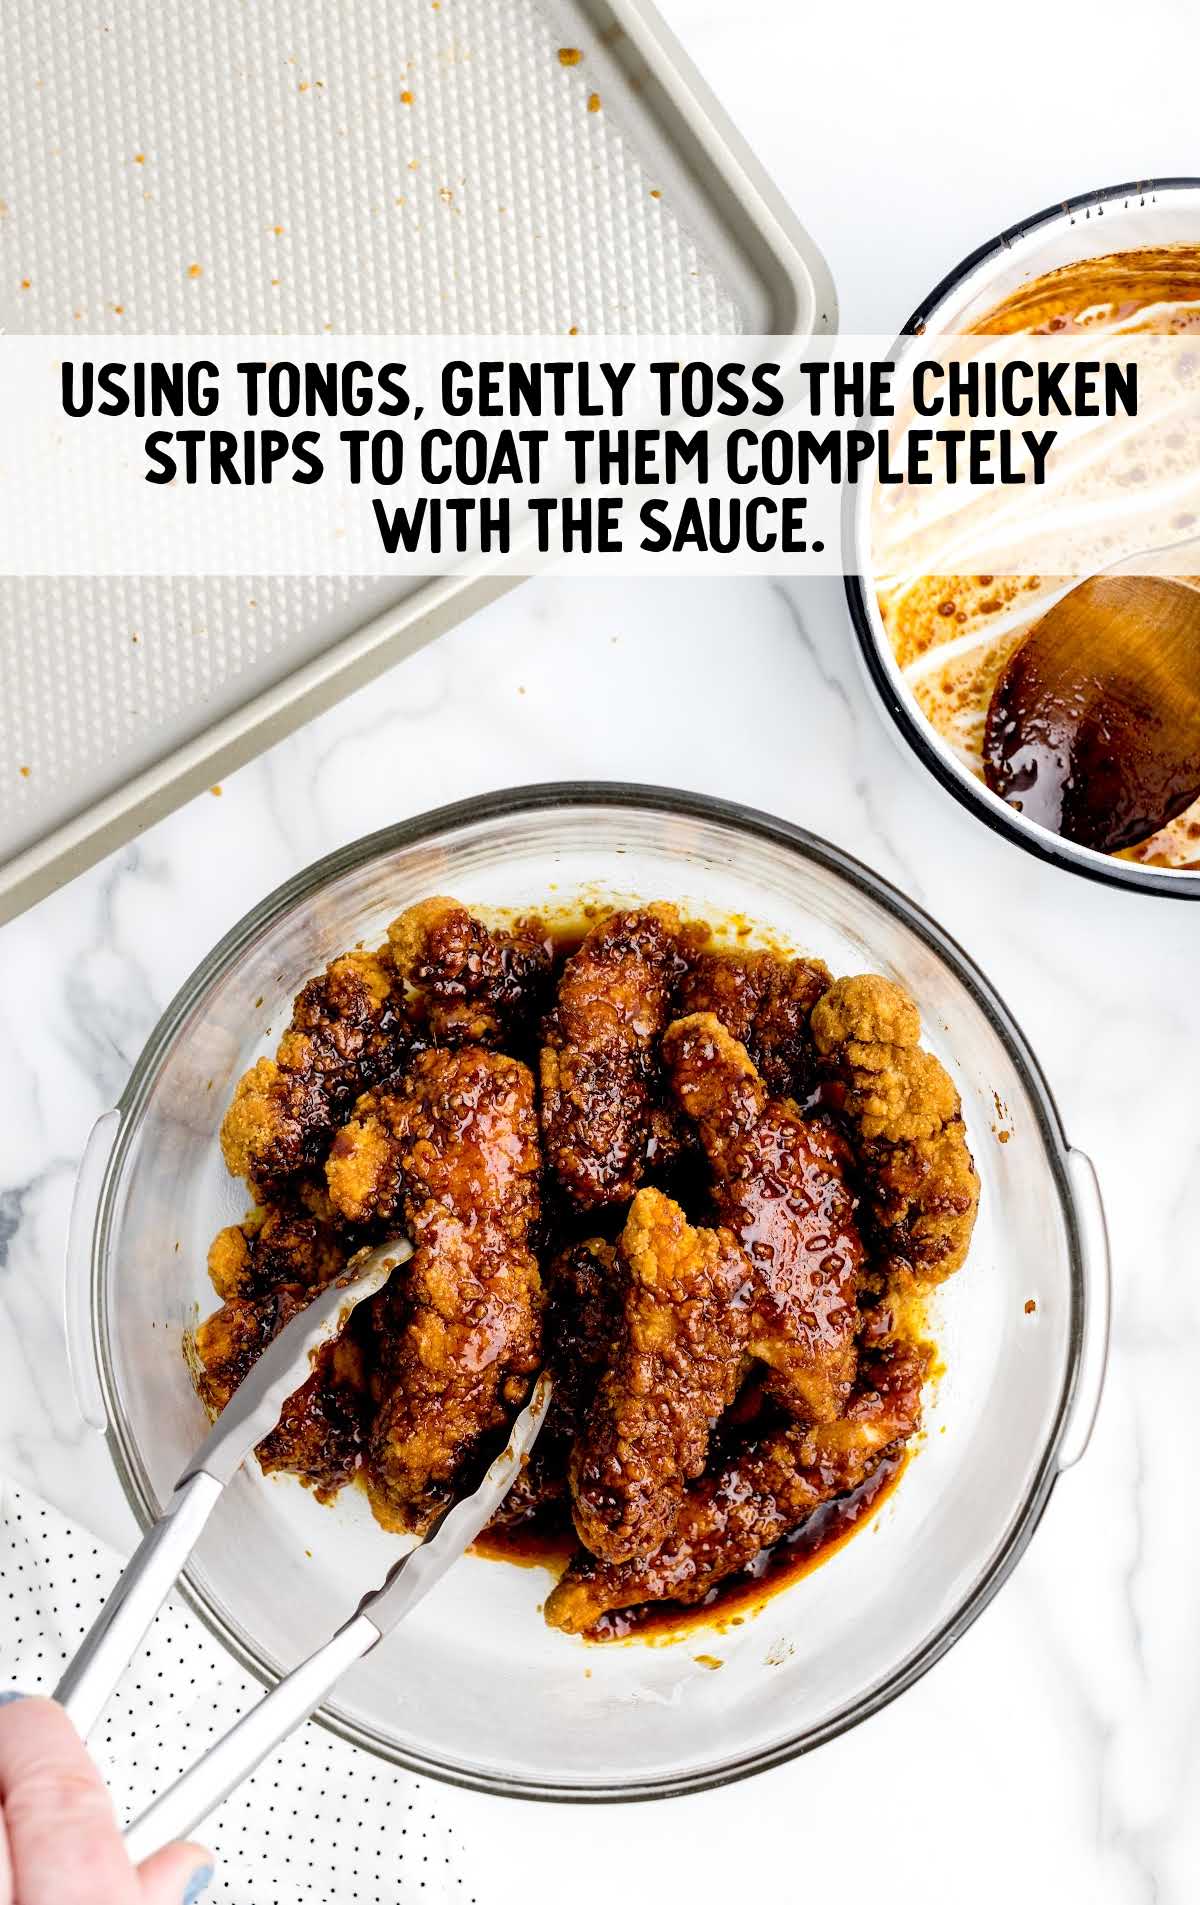 toss chicken strips into the sauce using tongs